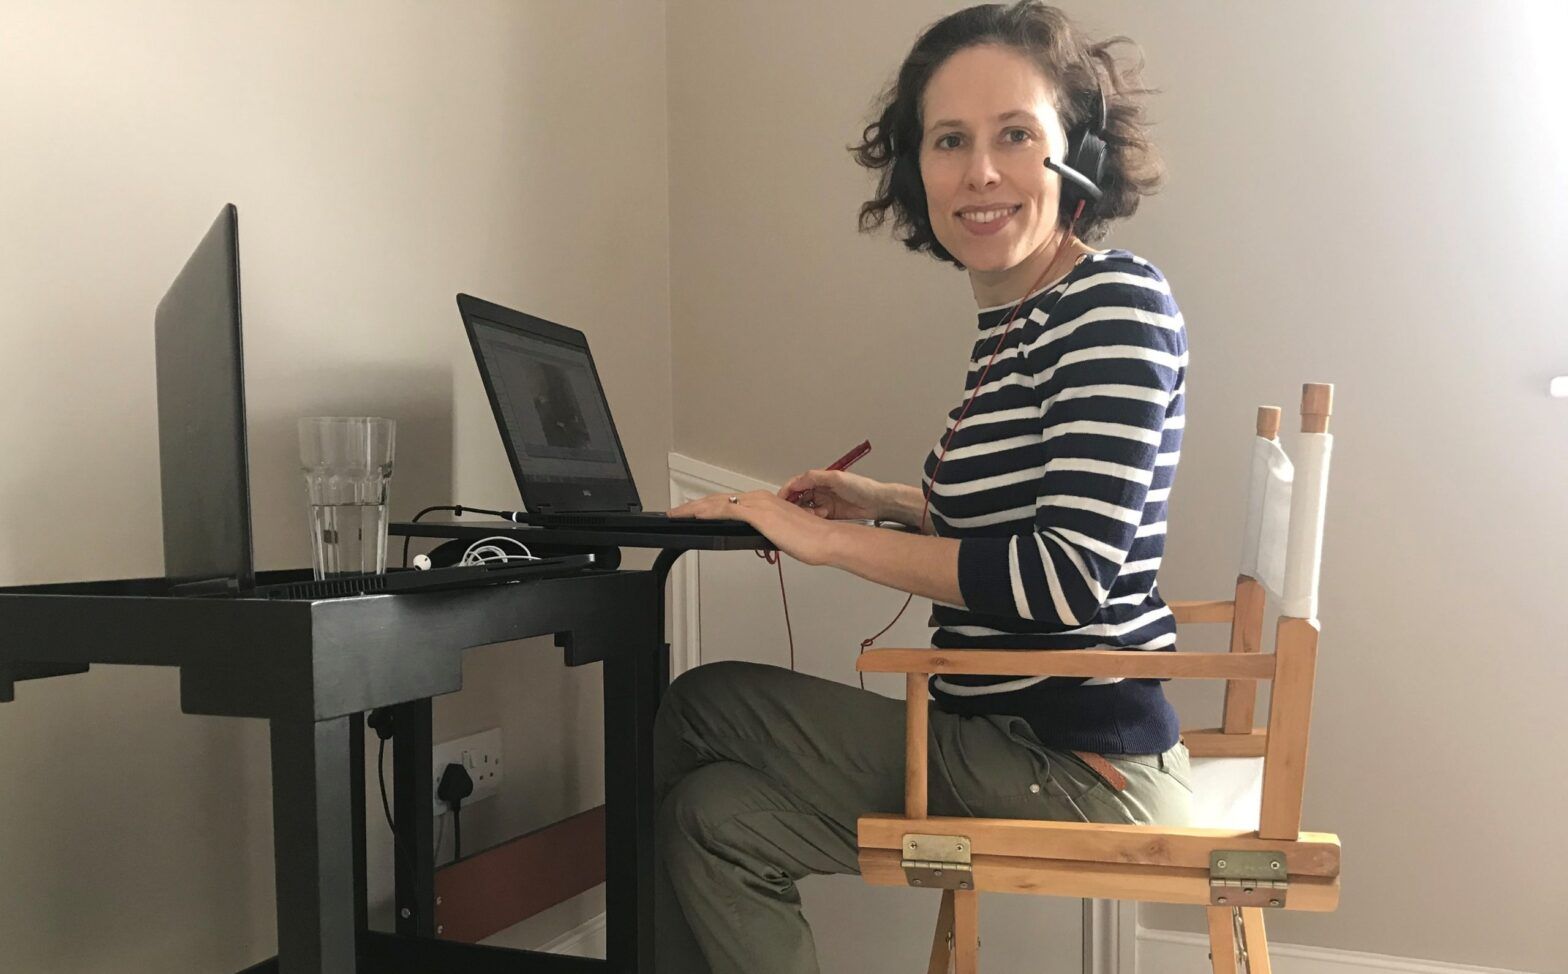 Cushioning the falls and home-schooling in French: Working from Home with Morningstar’s Hortense Bioy